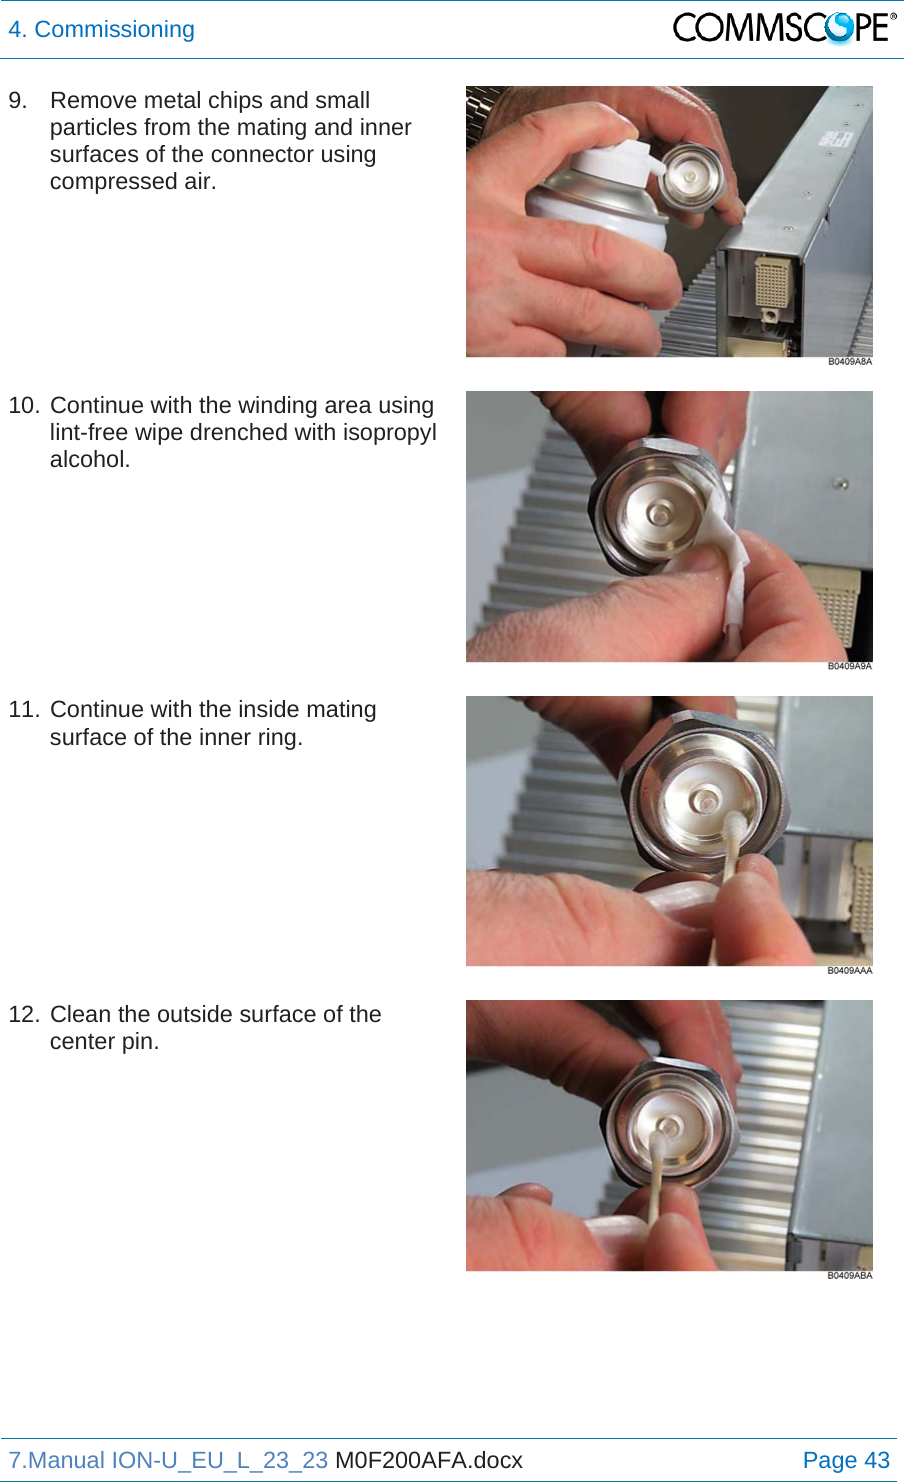 4. Commissioning  7.Manual ION-U_EU_L_23_23 M0F200AFA.docx Page 43 9.  Remove metal chips and small particles from the mating and inner surfaces of the connector using compressed air.   10. Continue with the winding area using lint-free wipe drenched with isopropyl alcohol.   11. Continue with the inside mating surface of the inner ring.   12. Clean the outside surface of the center pin.   